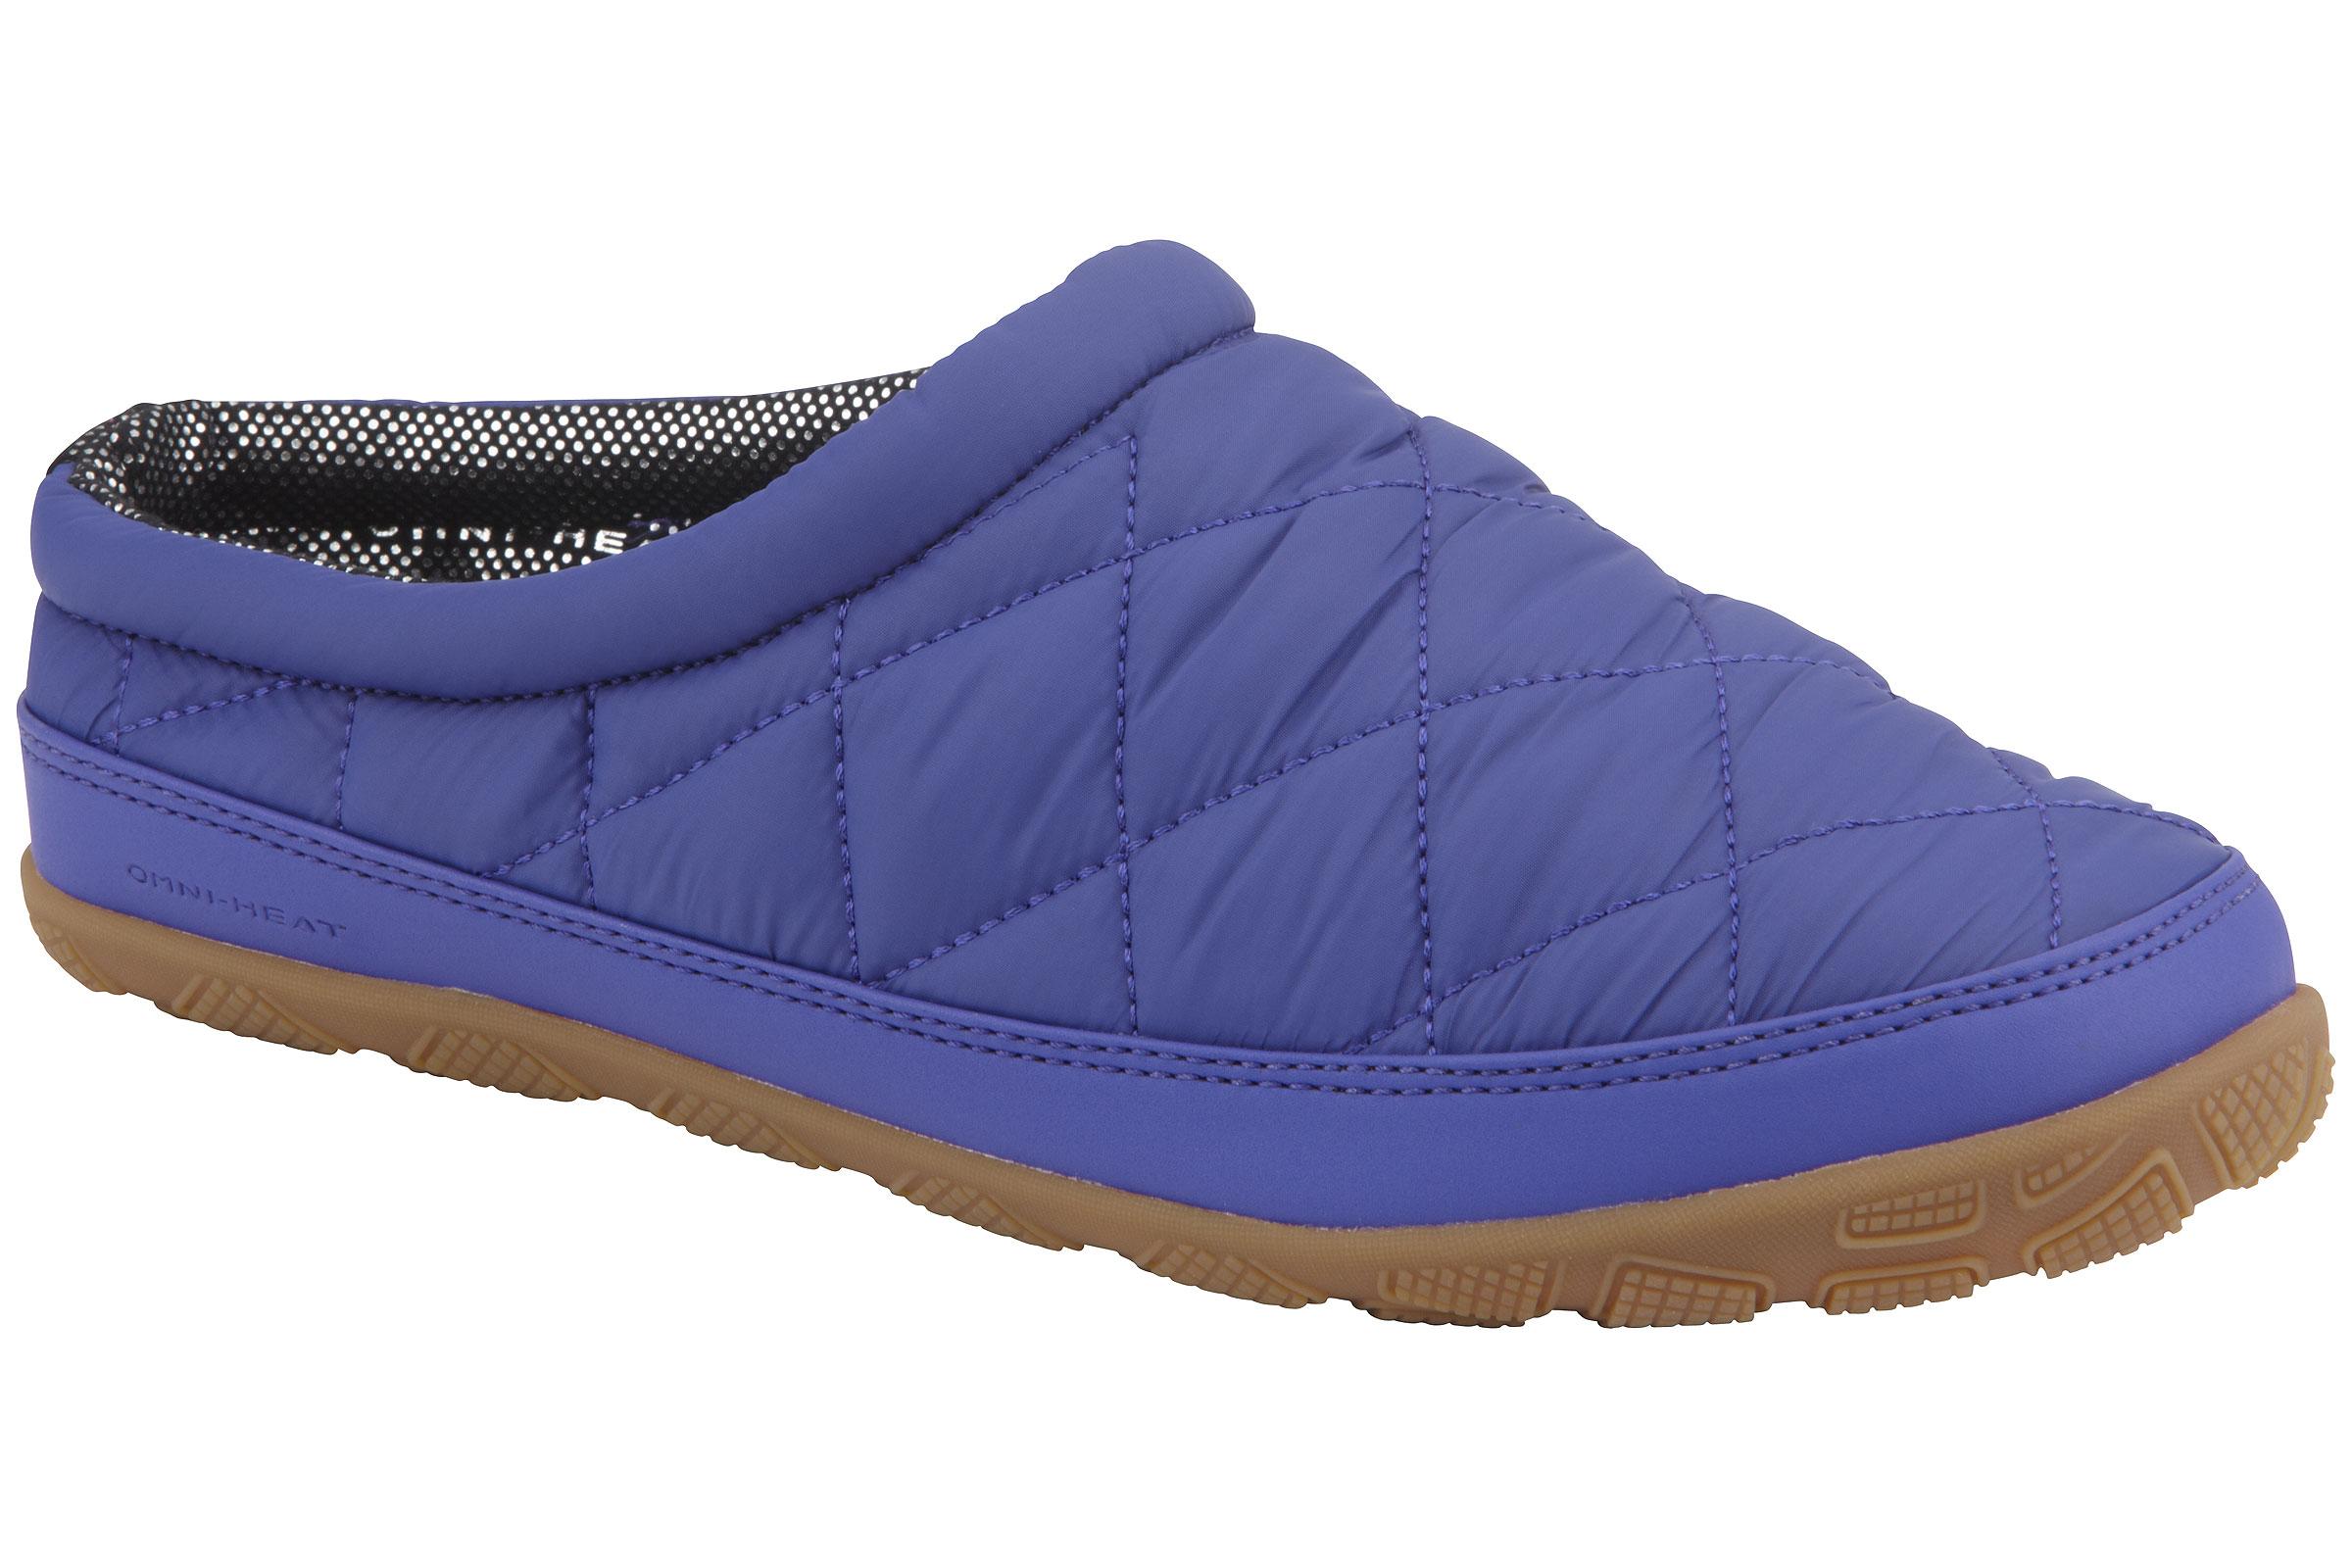 Foto Zapatillas Columbia Packed Out Omni-Heat azul para mujer , 42